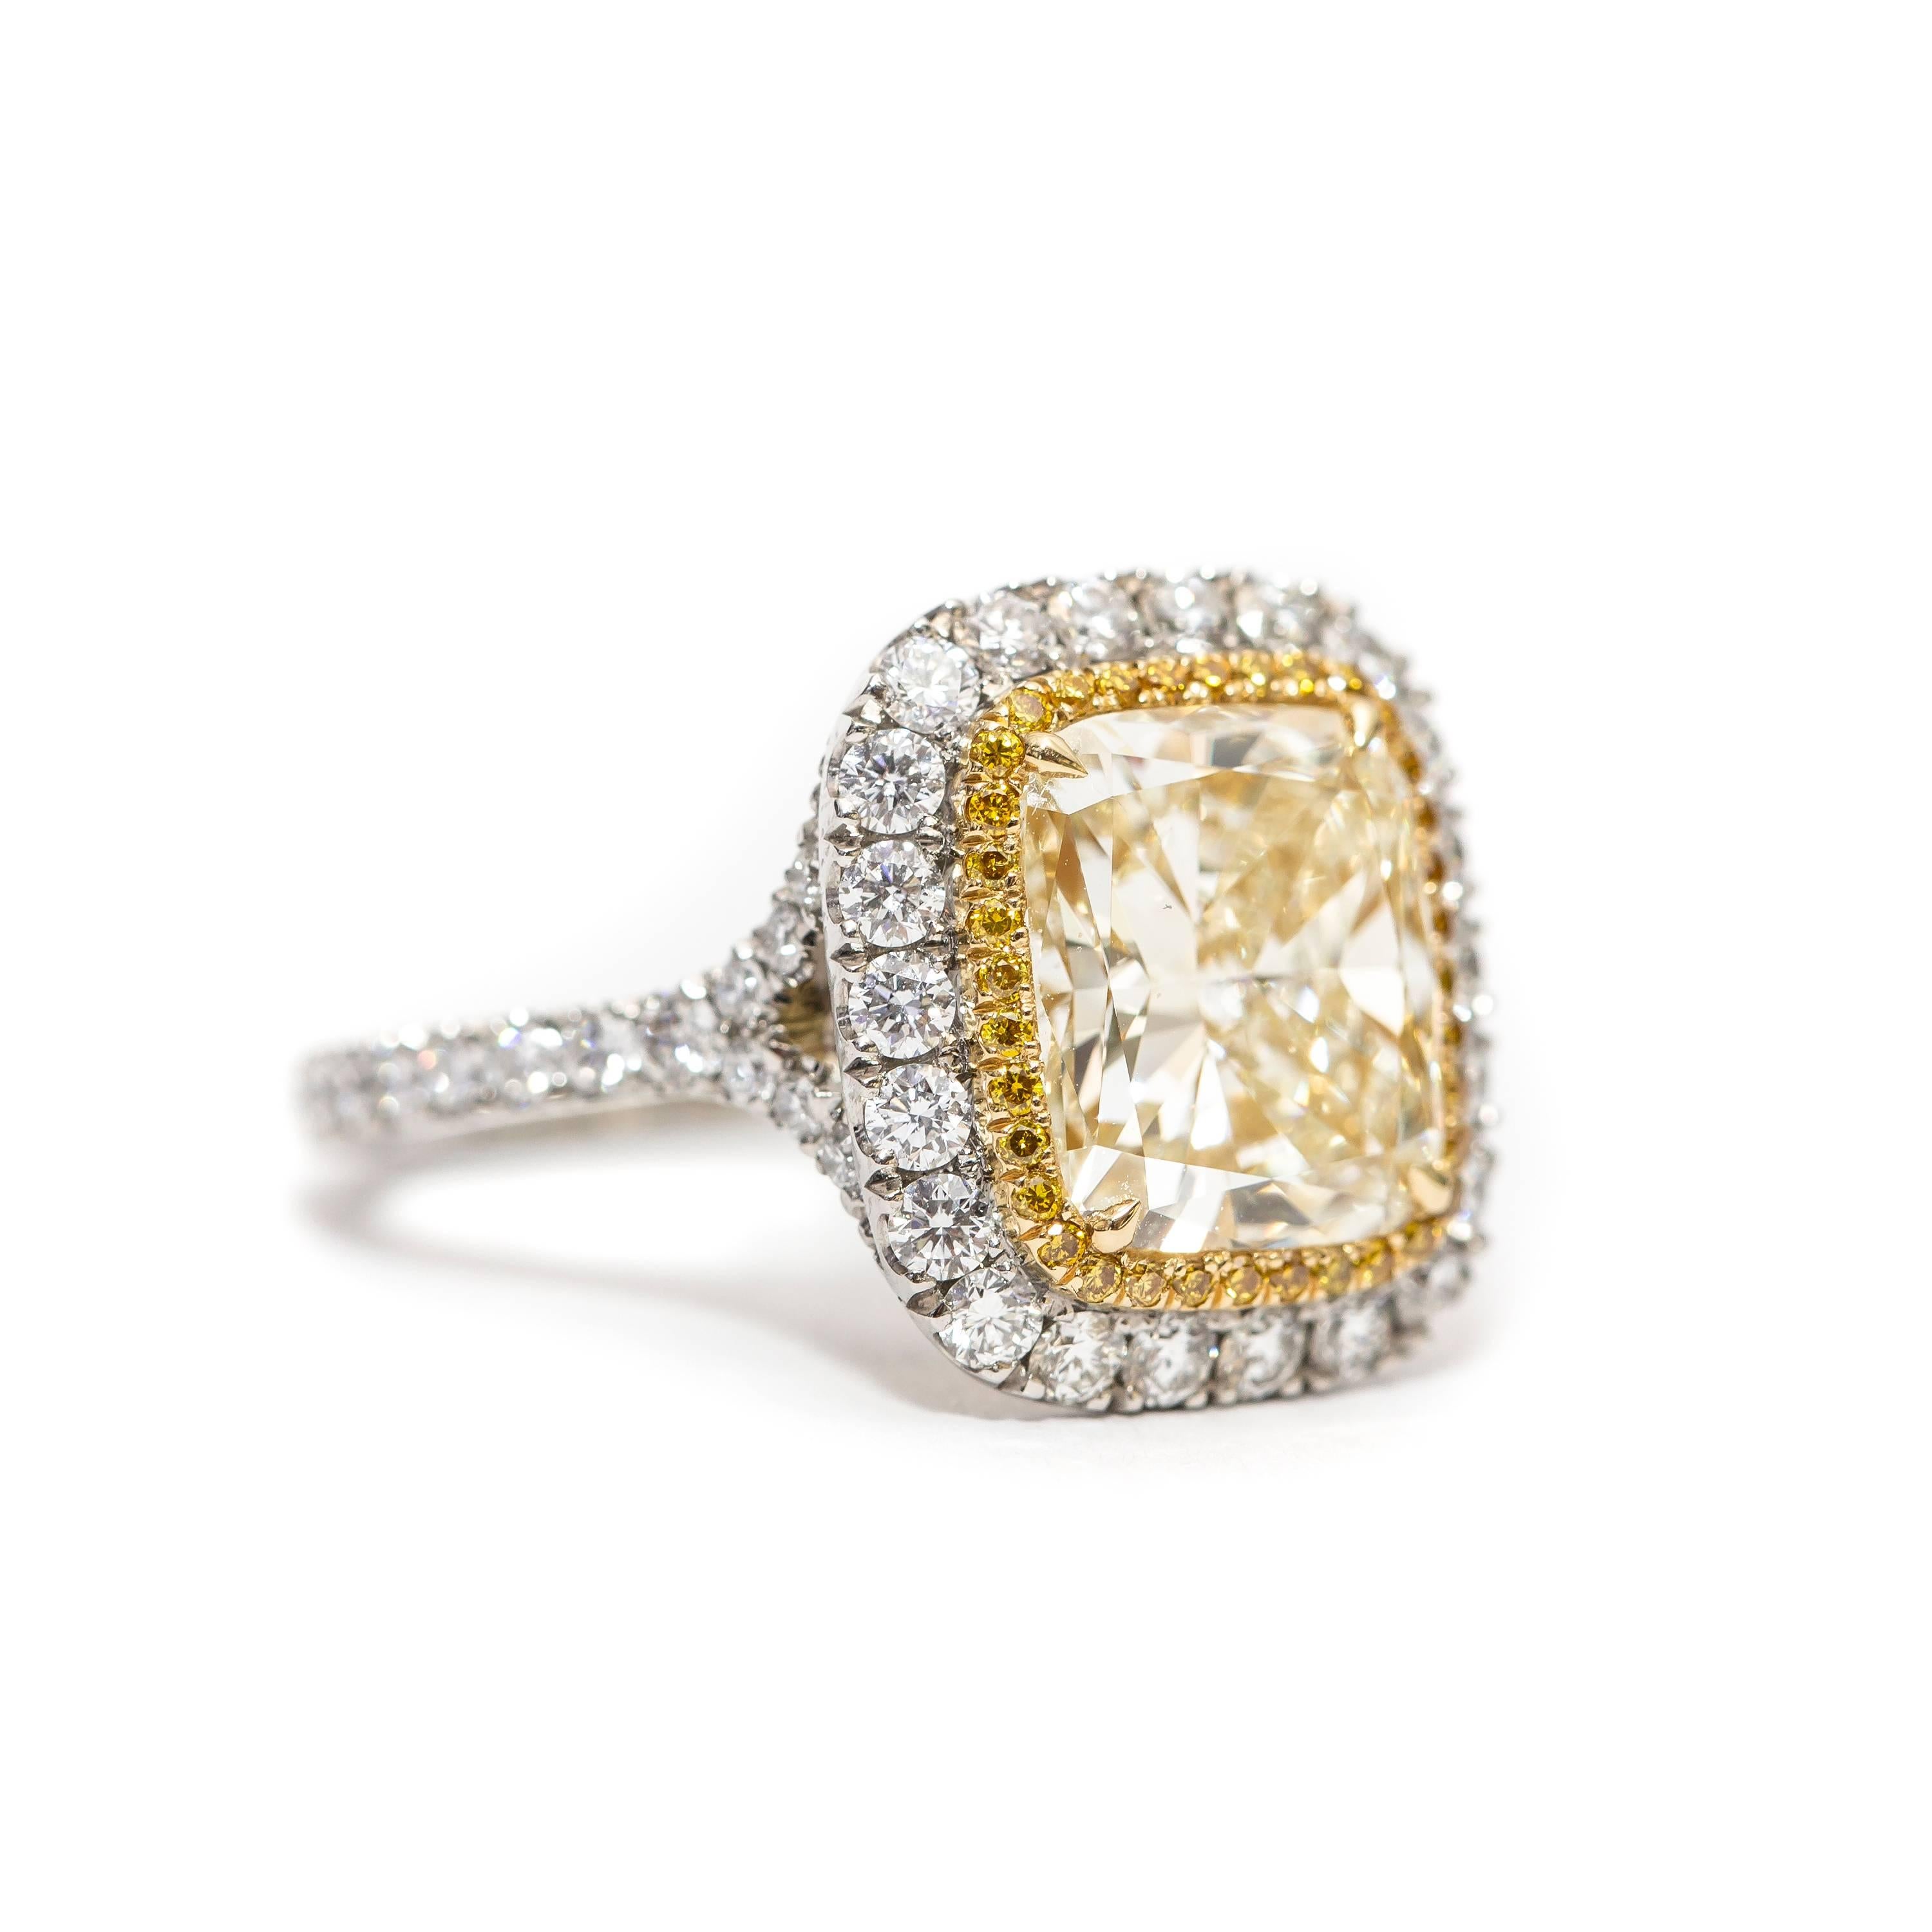 This Spectacular Yellow 4.23 Carat Radiant cut Diamond (Color W-X) which is set in the center with 0.14 Carat of Round Brilliant cut Fancy Intense Yellow Diamonds on the perimeter with 1.14 Carat Color H Clarity SI1 of Round Brilliant Diamonds on